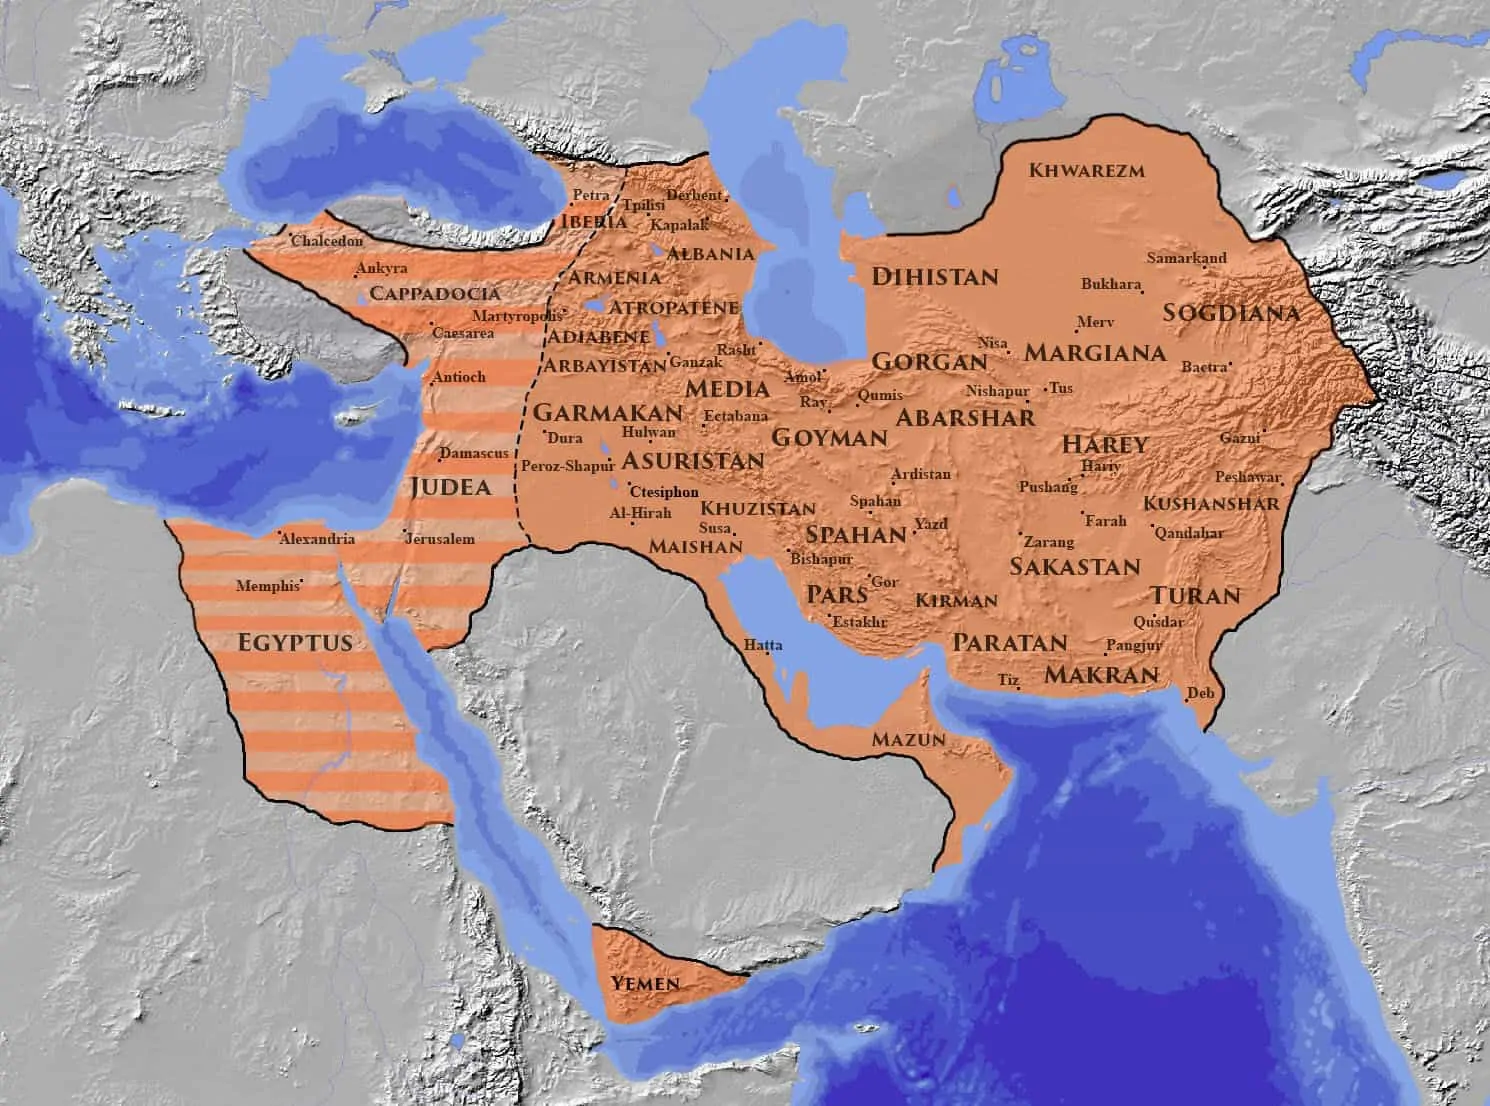 The Sasanian Empire at its greatest extent c. 620, under Khosrow II